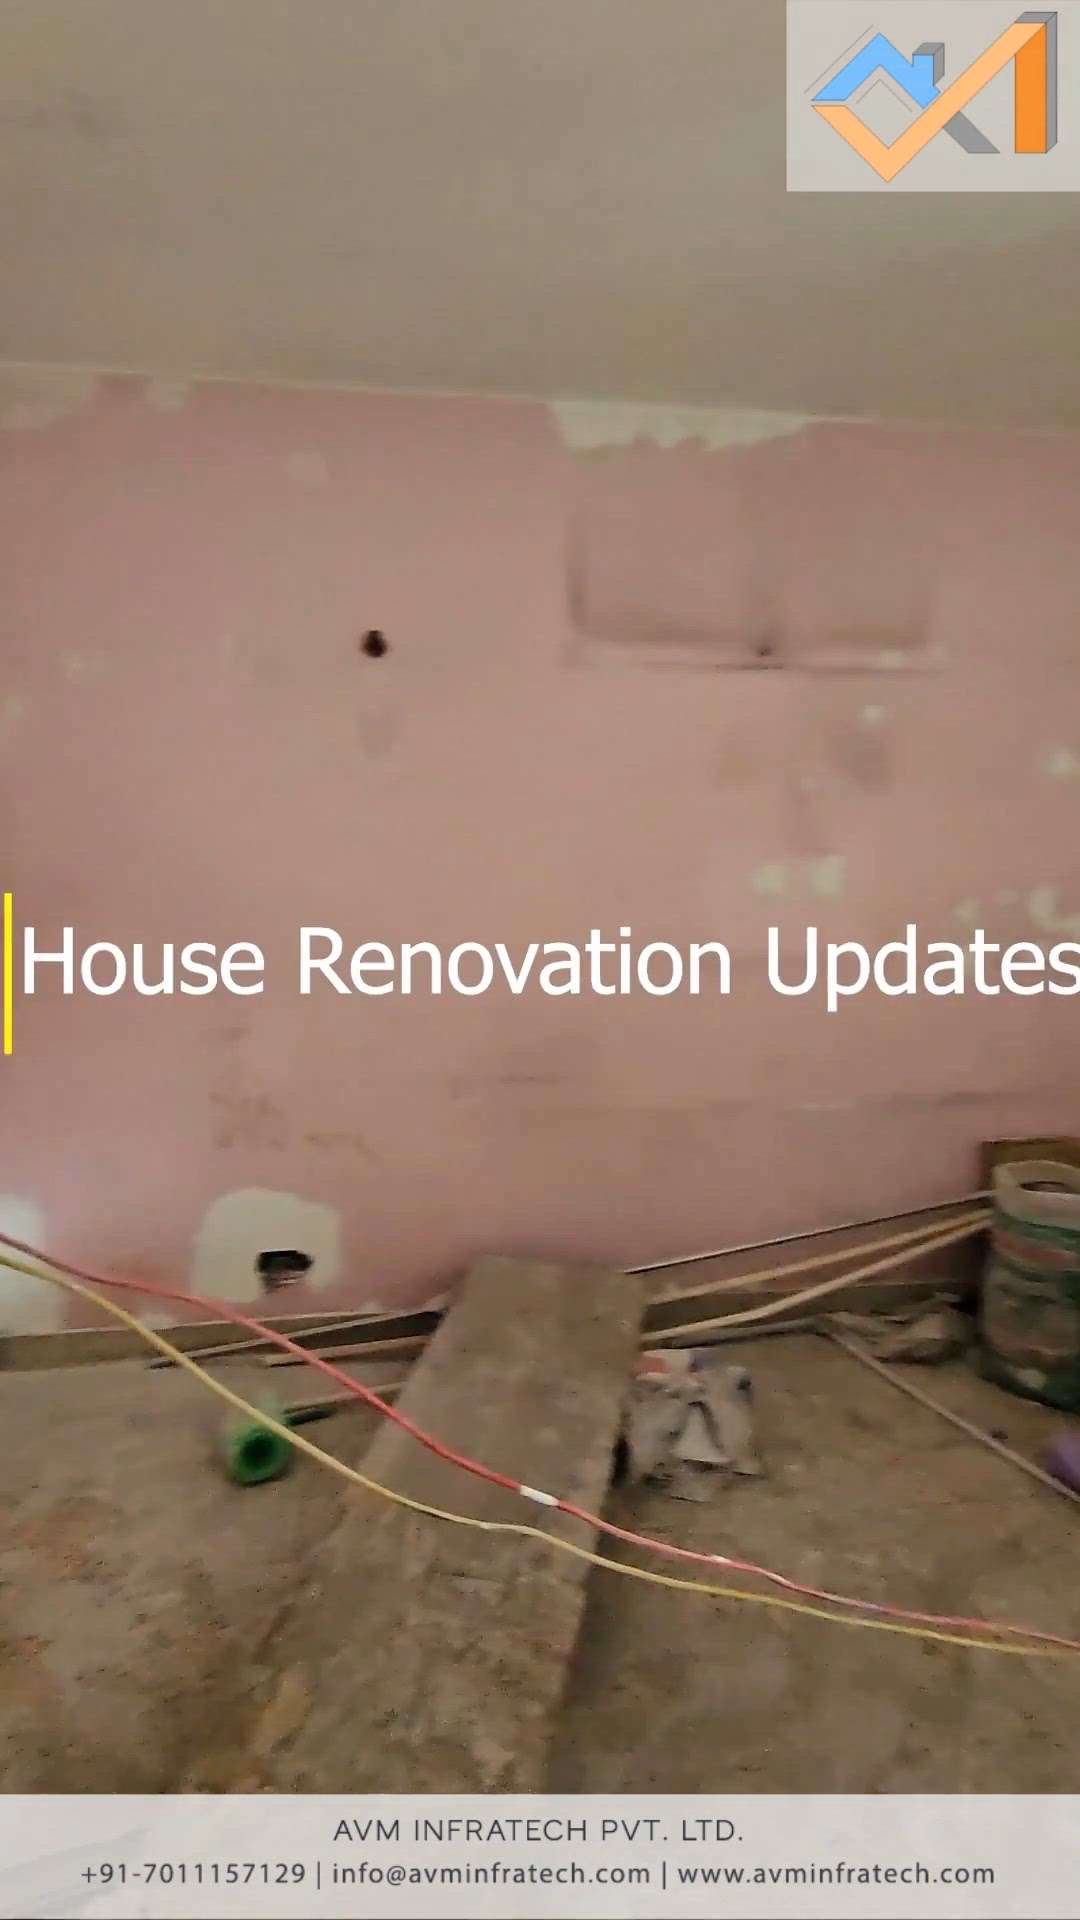 2BHK Flat Renovation Updates


Follow us for more such amazing updates. 
.
.
#2bhk #2bhkflats #2bhkinterior #2bhkhomes #2bhkflat #2bhkapartments #home #homedecor #homedesign #homedecoration #house #housedesign #housegoals #renovation #avminfratech #renovationproject #homerenovation